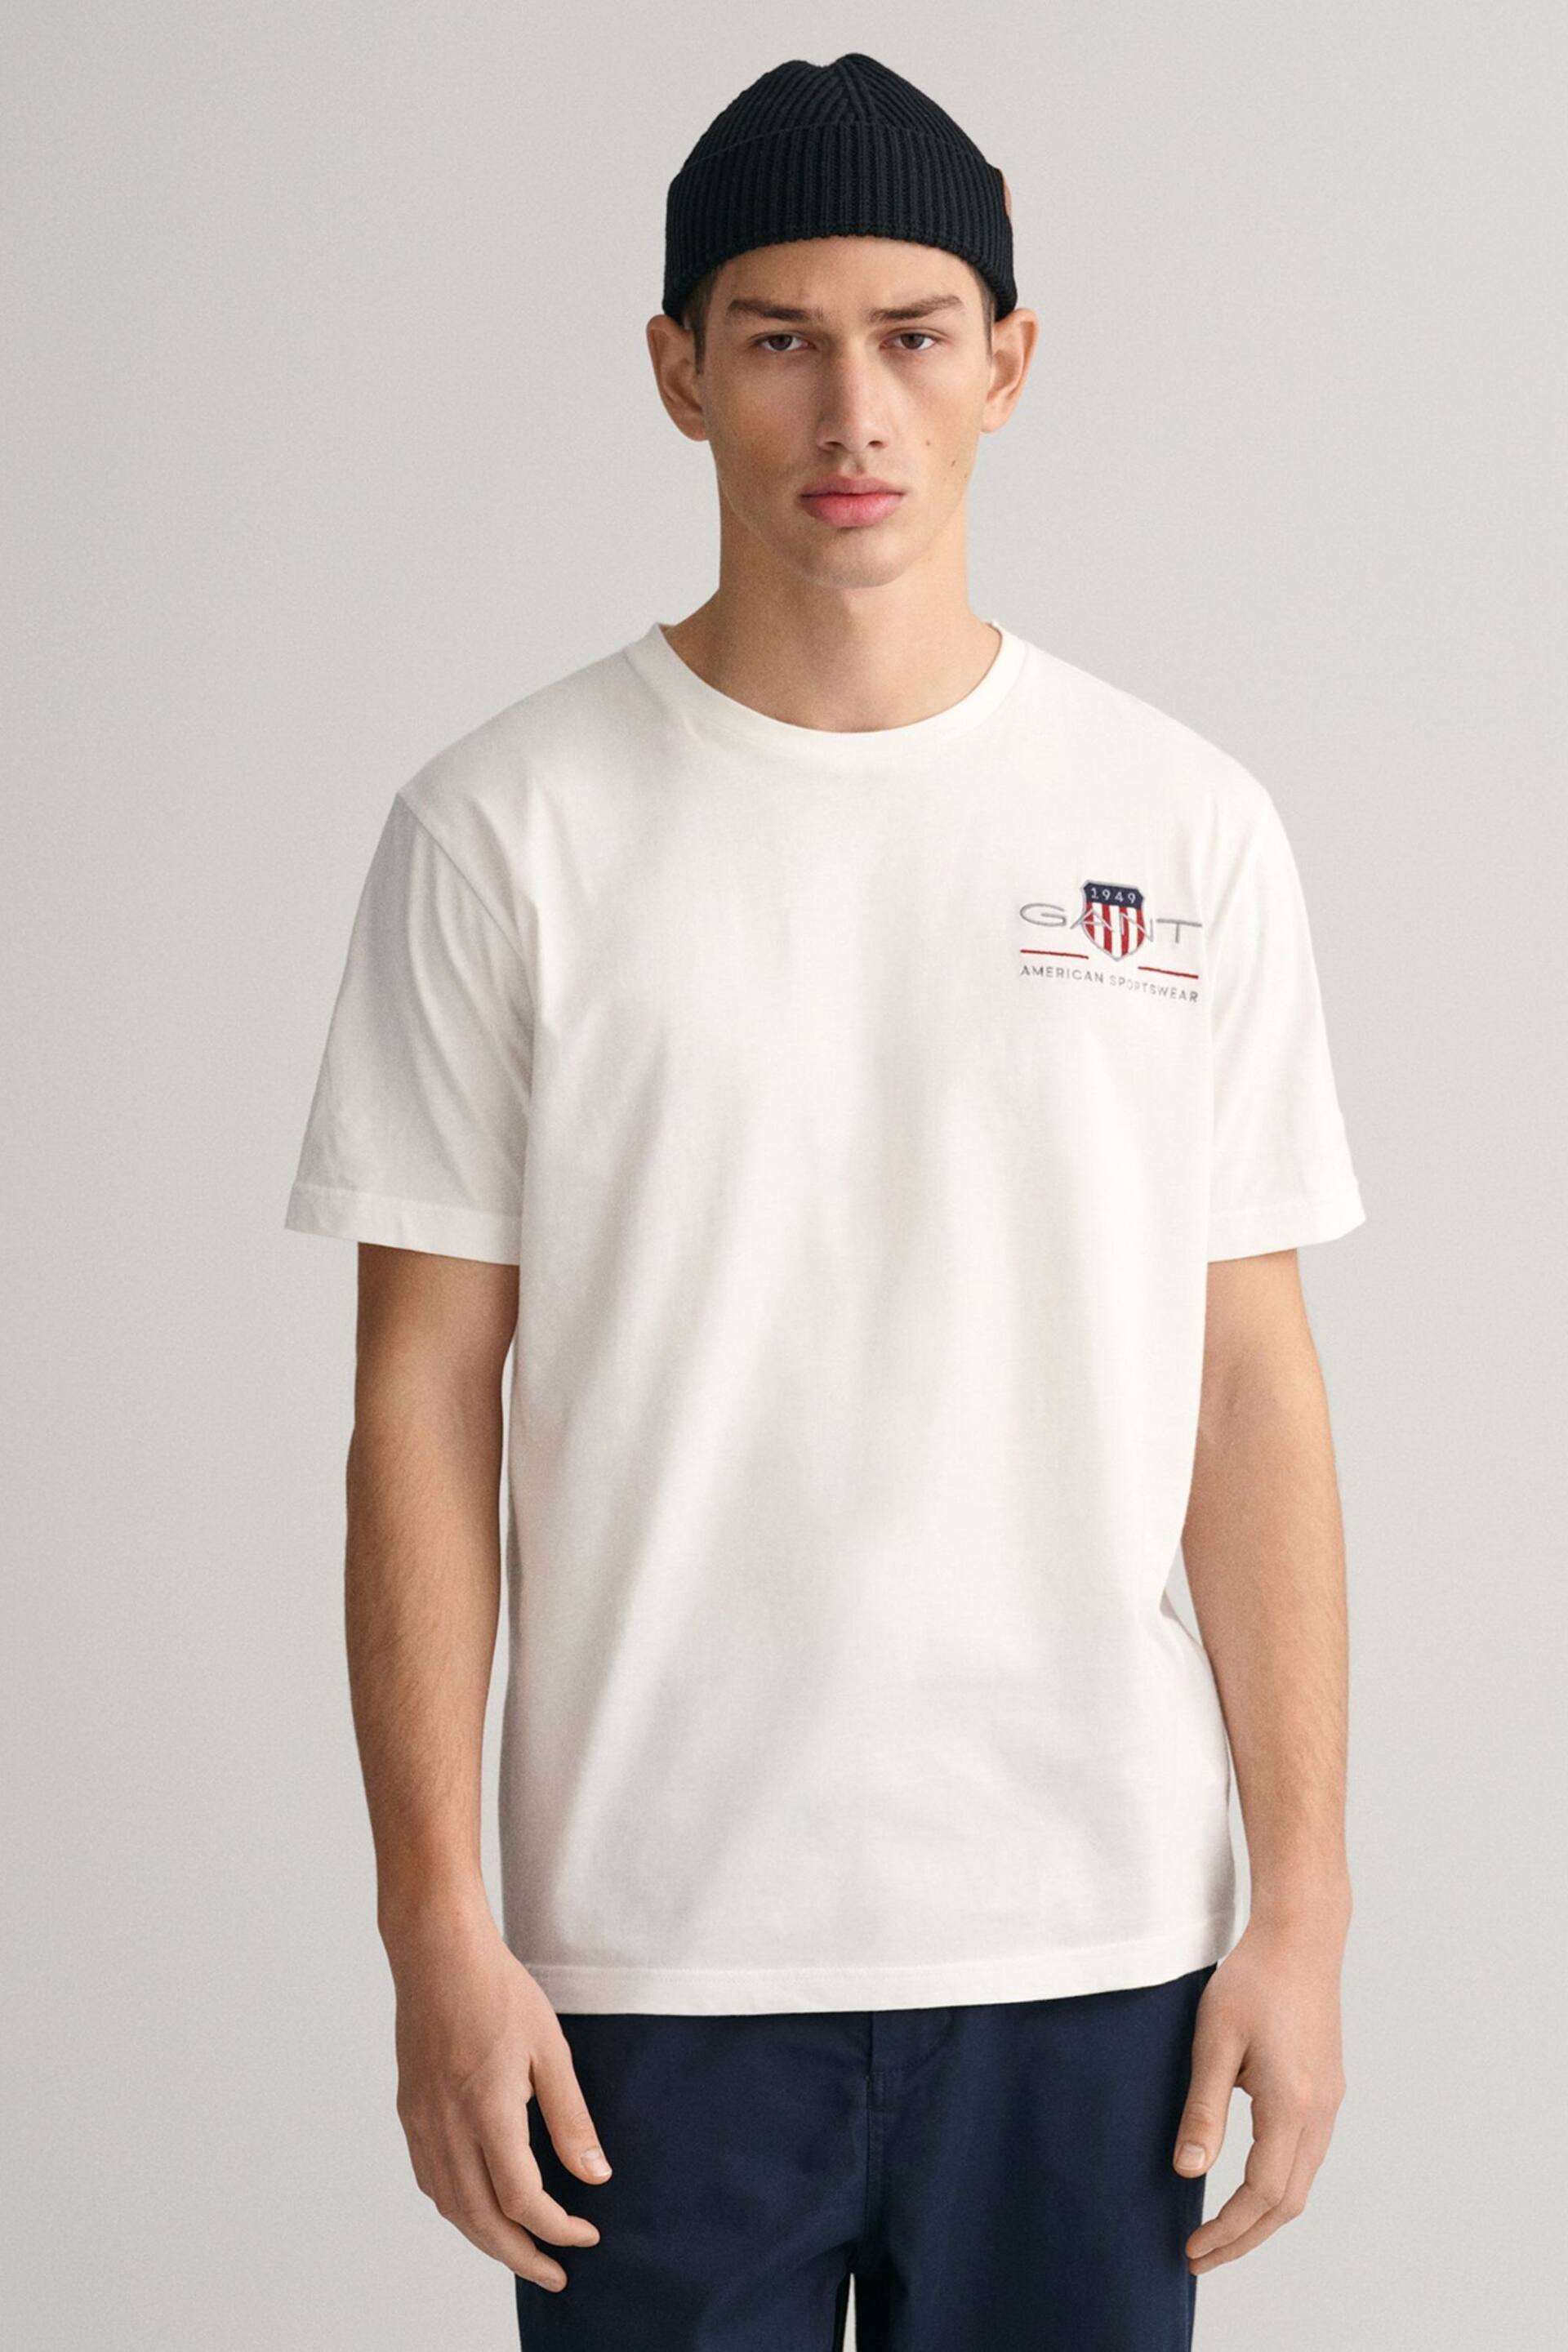 GANT Embroidered Archive Shield T-Shirt - Image 1 of 4